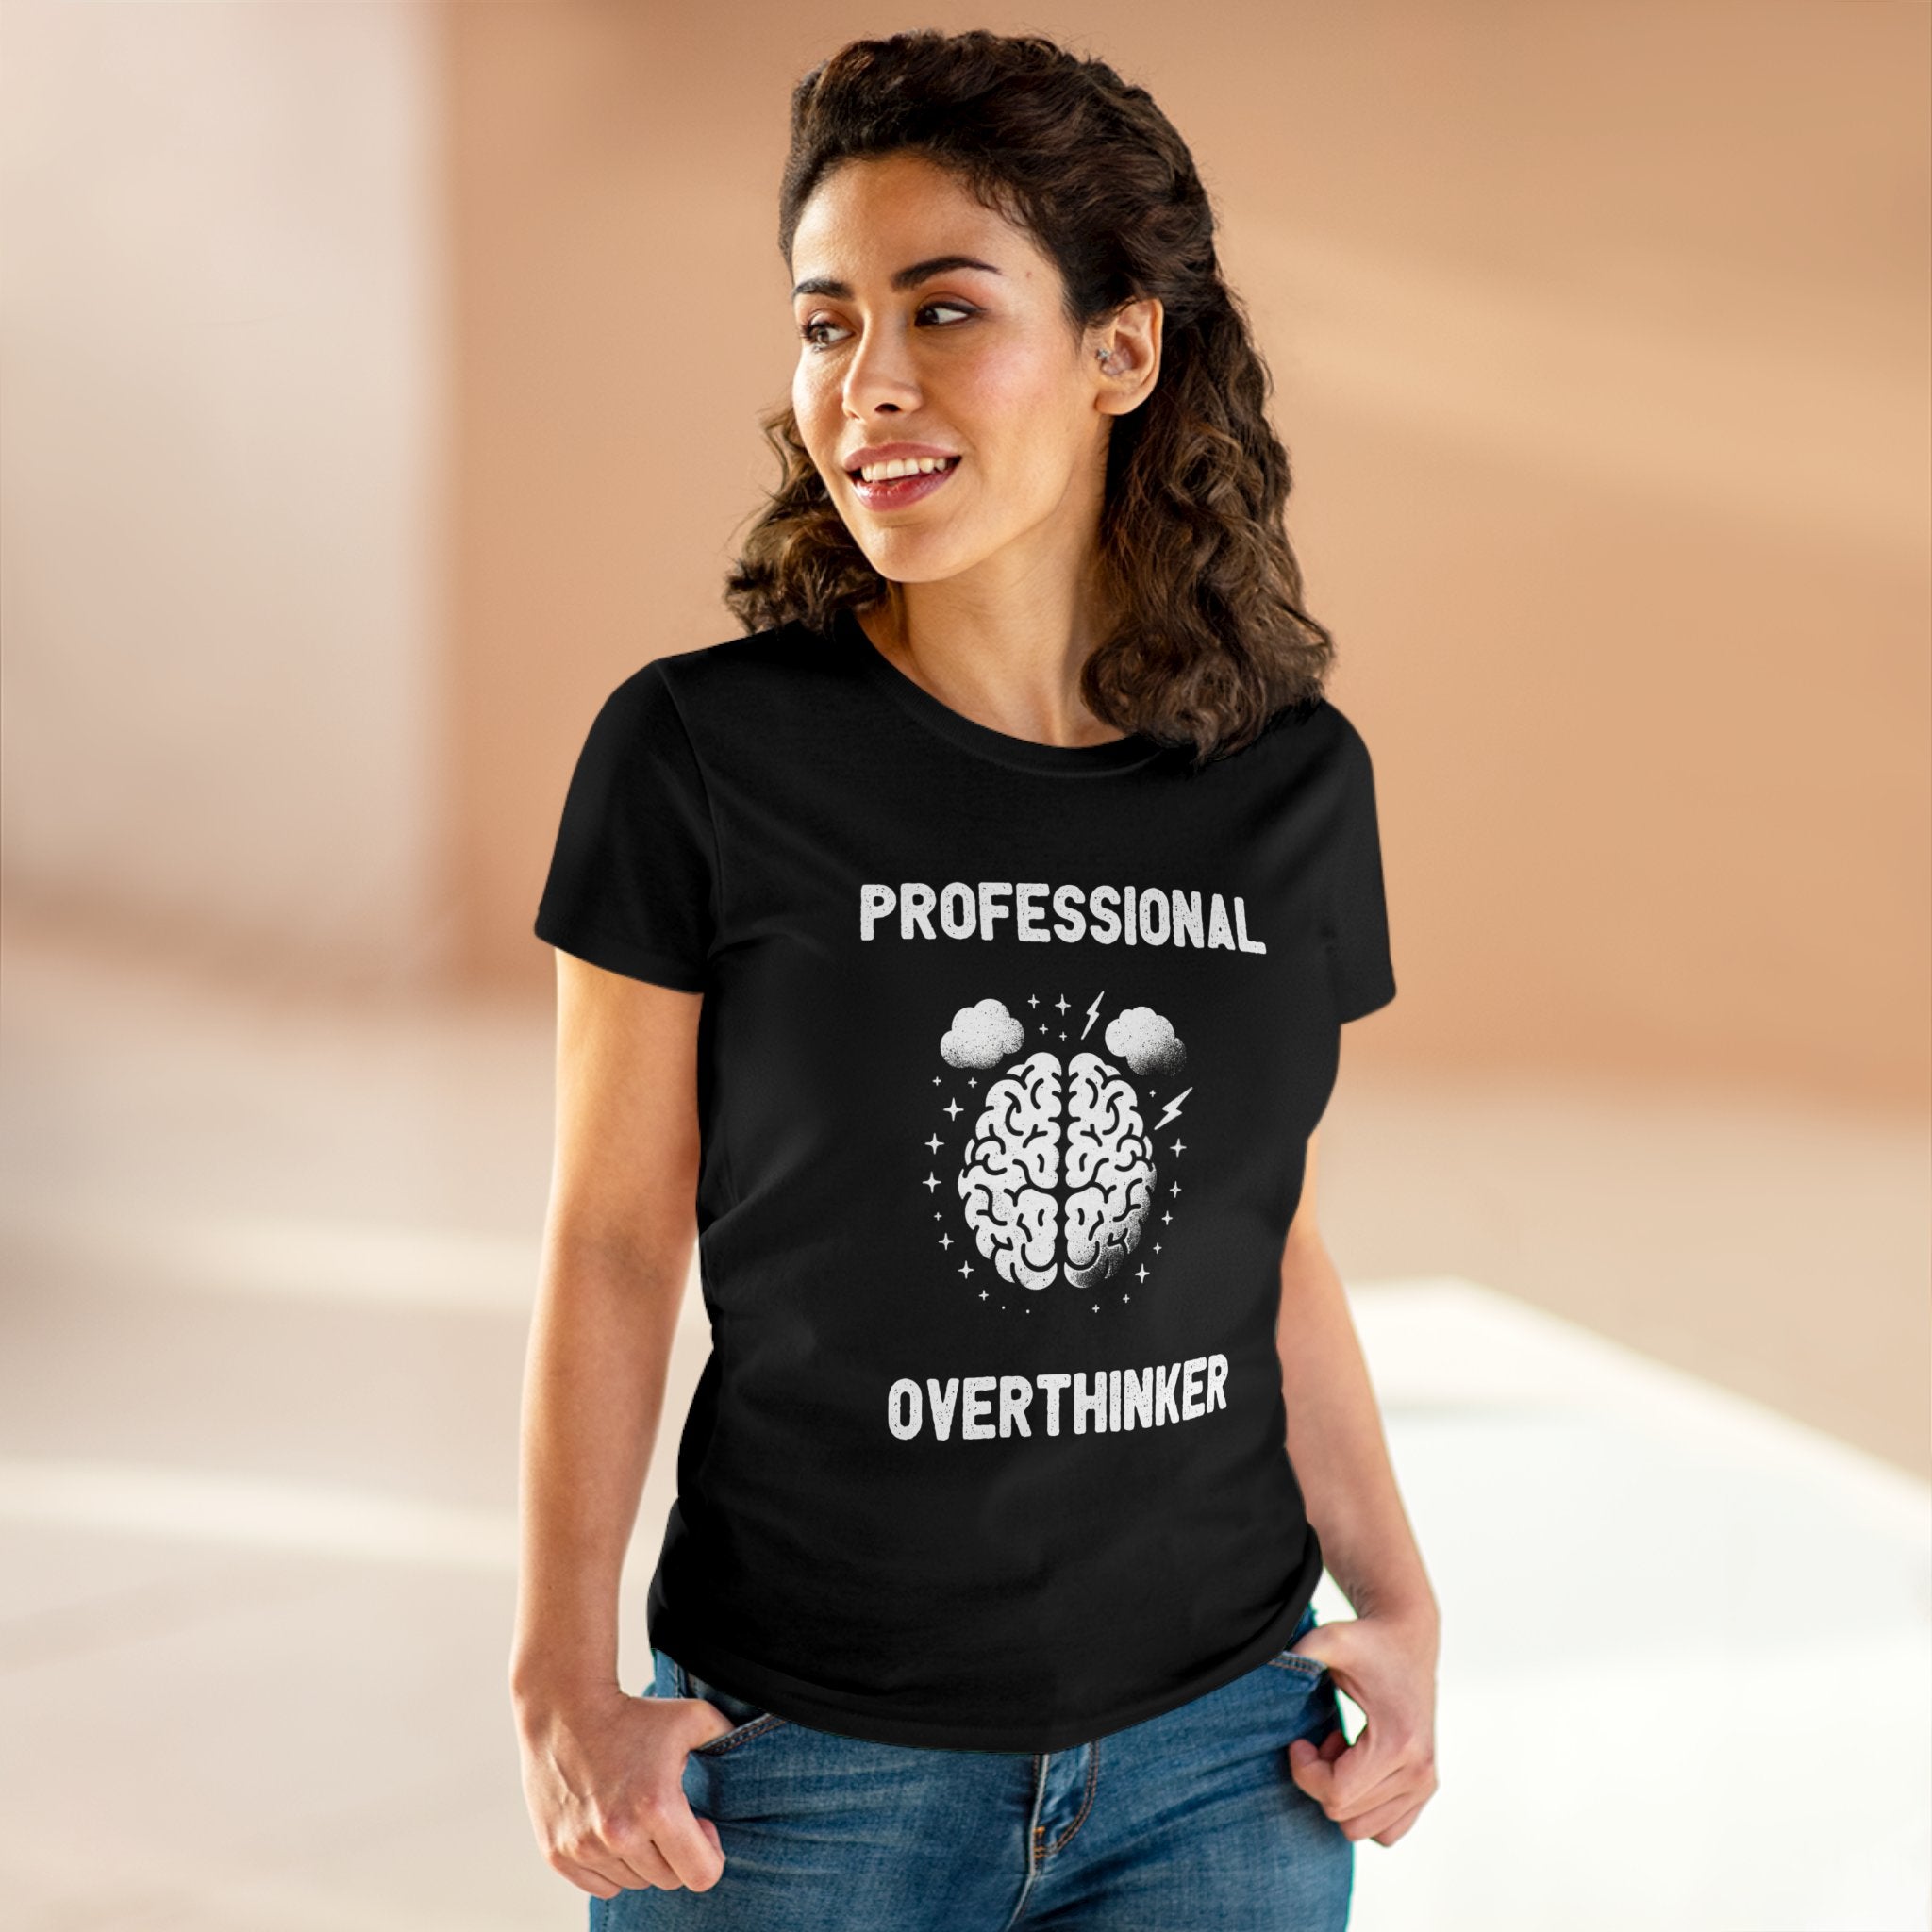 A person stands wearing a black, fitted silhouette T-shirt with the text "Professional Overthinker" and an illustrated brain design. The Professional Overthinker - Women's Tee is made from soft light cotton, ensuring comfort and style.